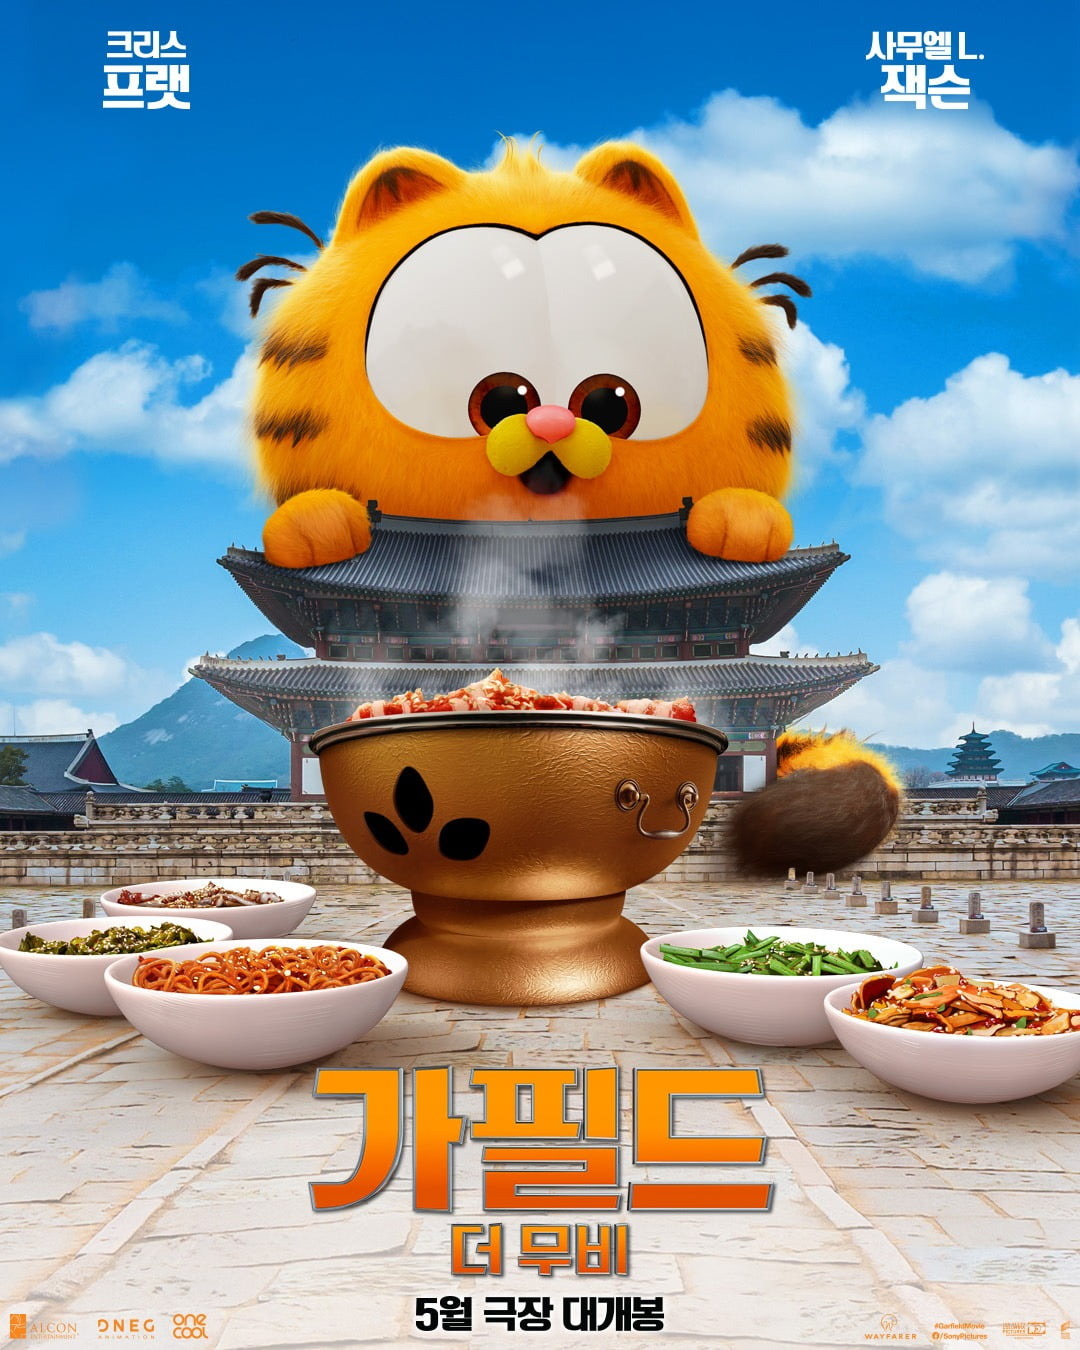 Extra Large Movie Poster Image for The Garfield Movie (#27 of 31)